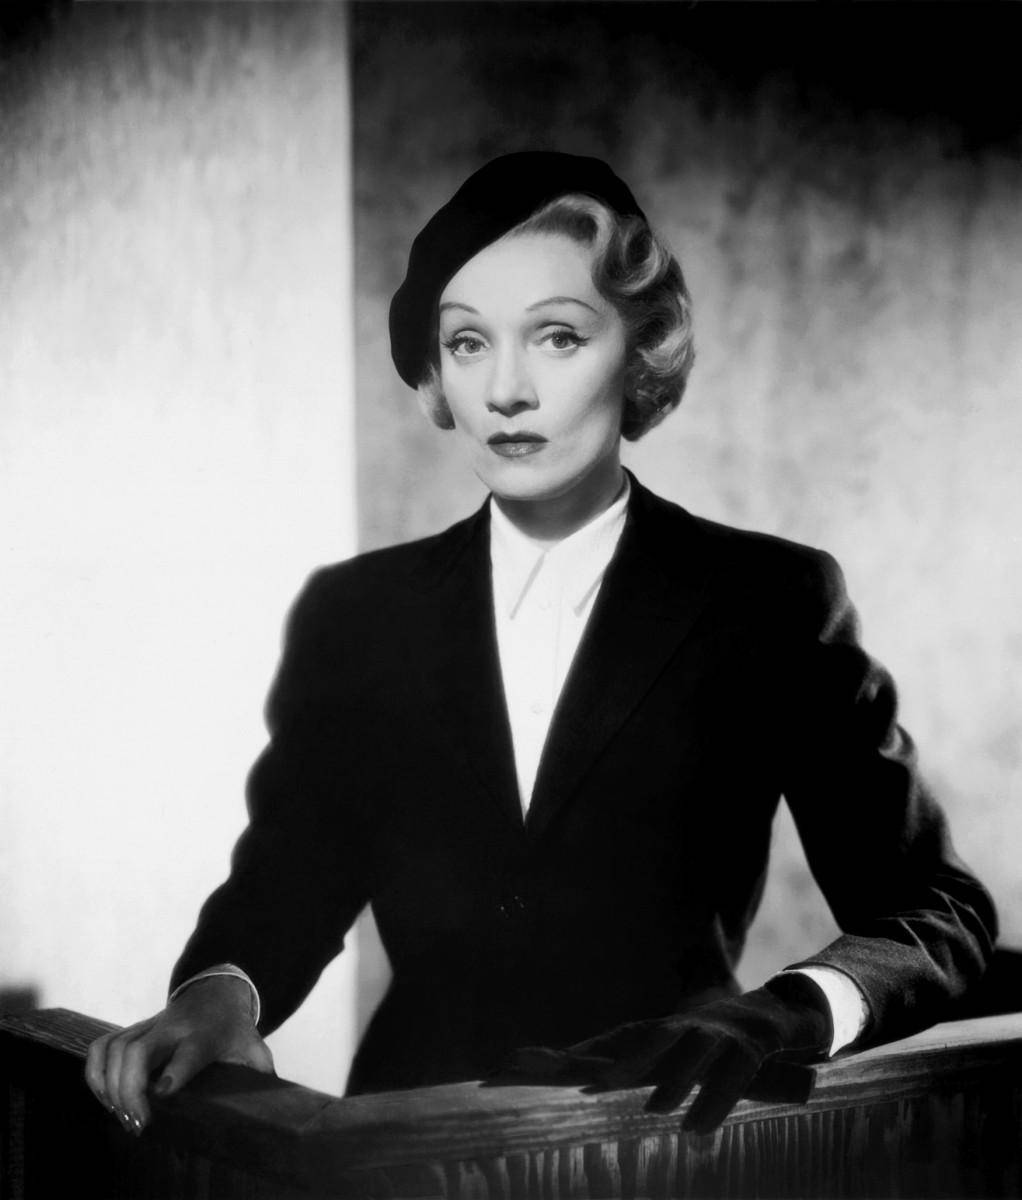 Marlene Dietrich on the witness stand in court Wallpaper